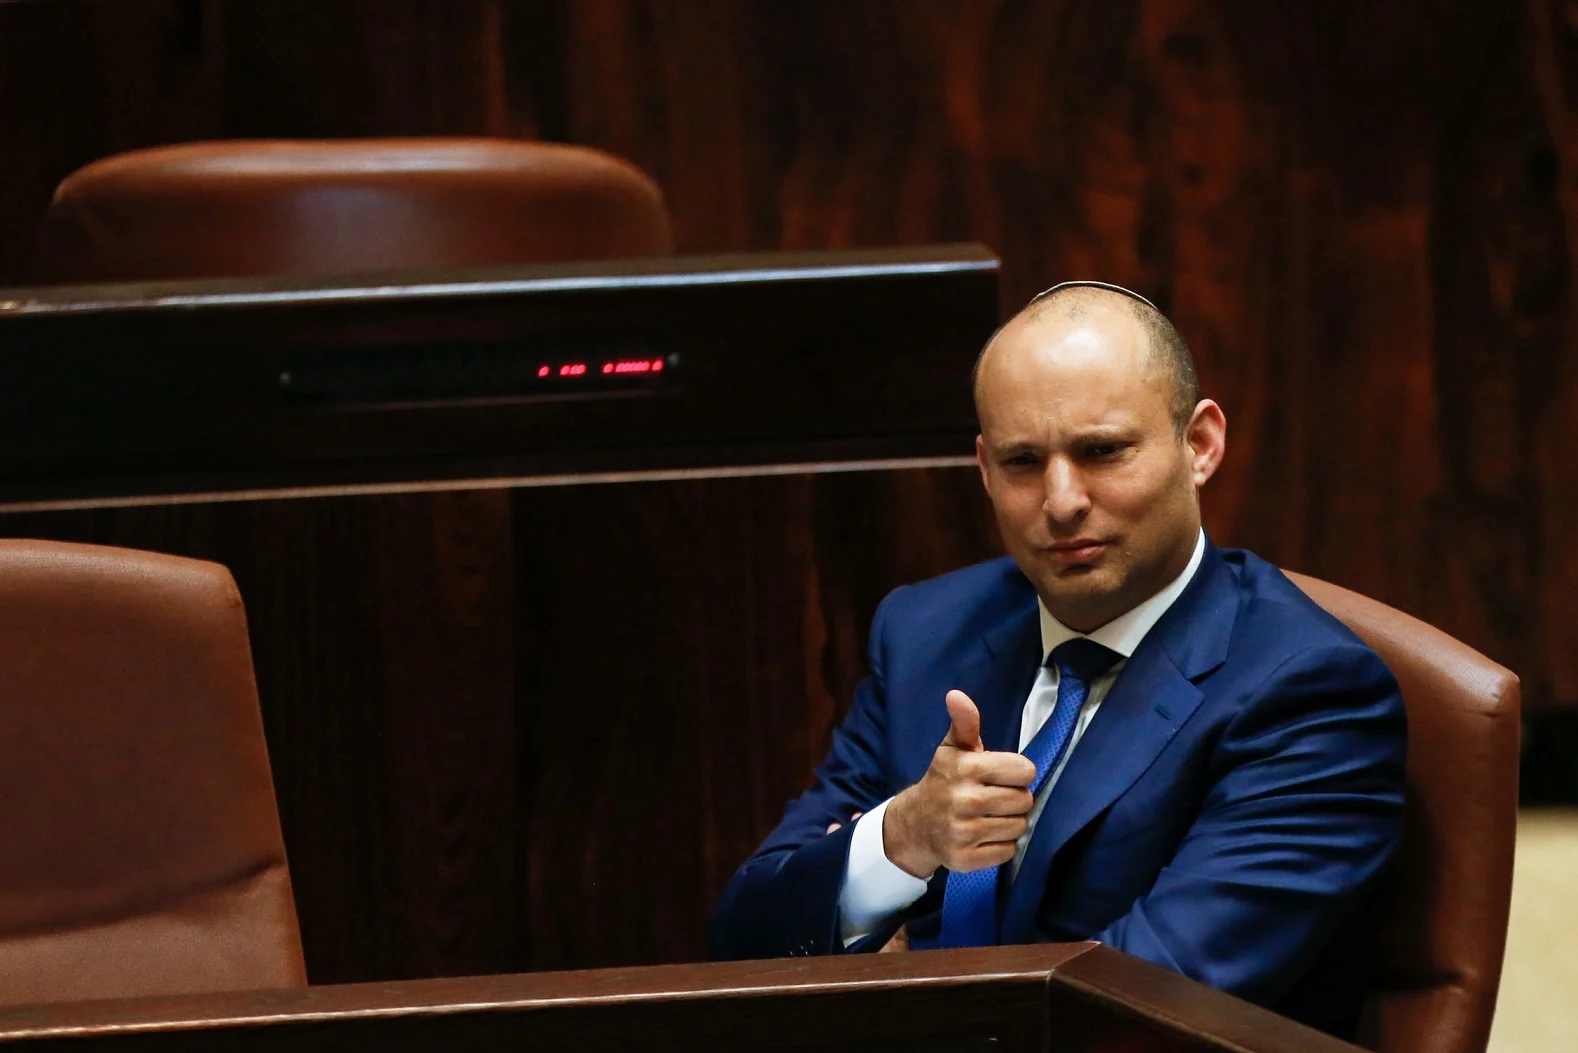 Israeli Education Minister Naftali Bennett Gestures During A Preliminary Vote On A Bill At The Knesset, The Israeli Parliament, In Jerusalem